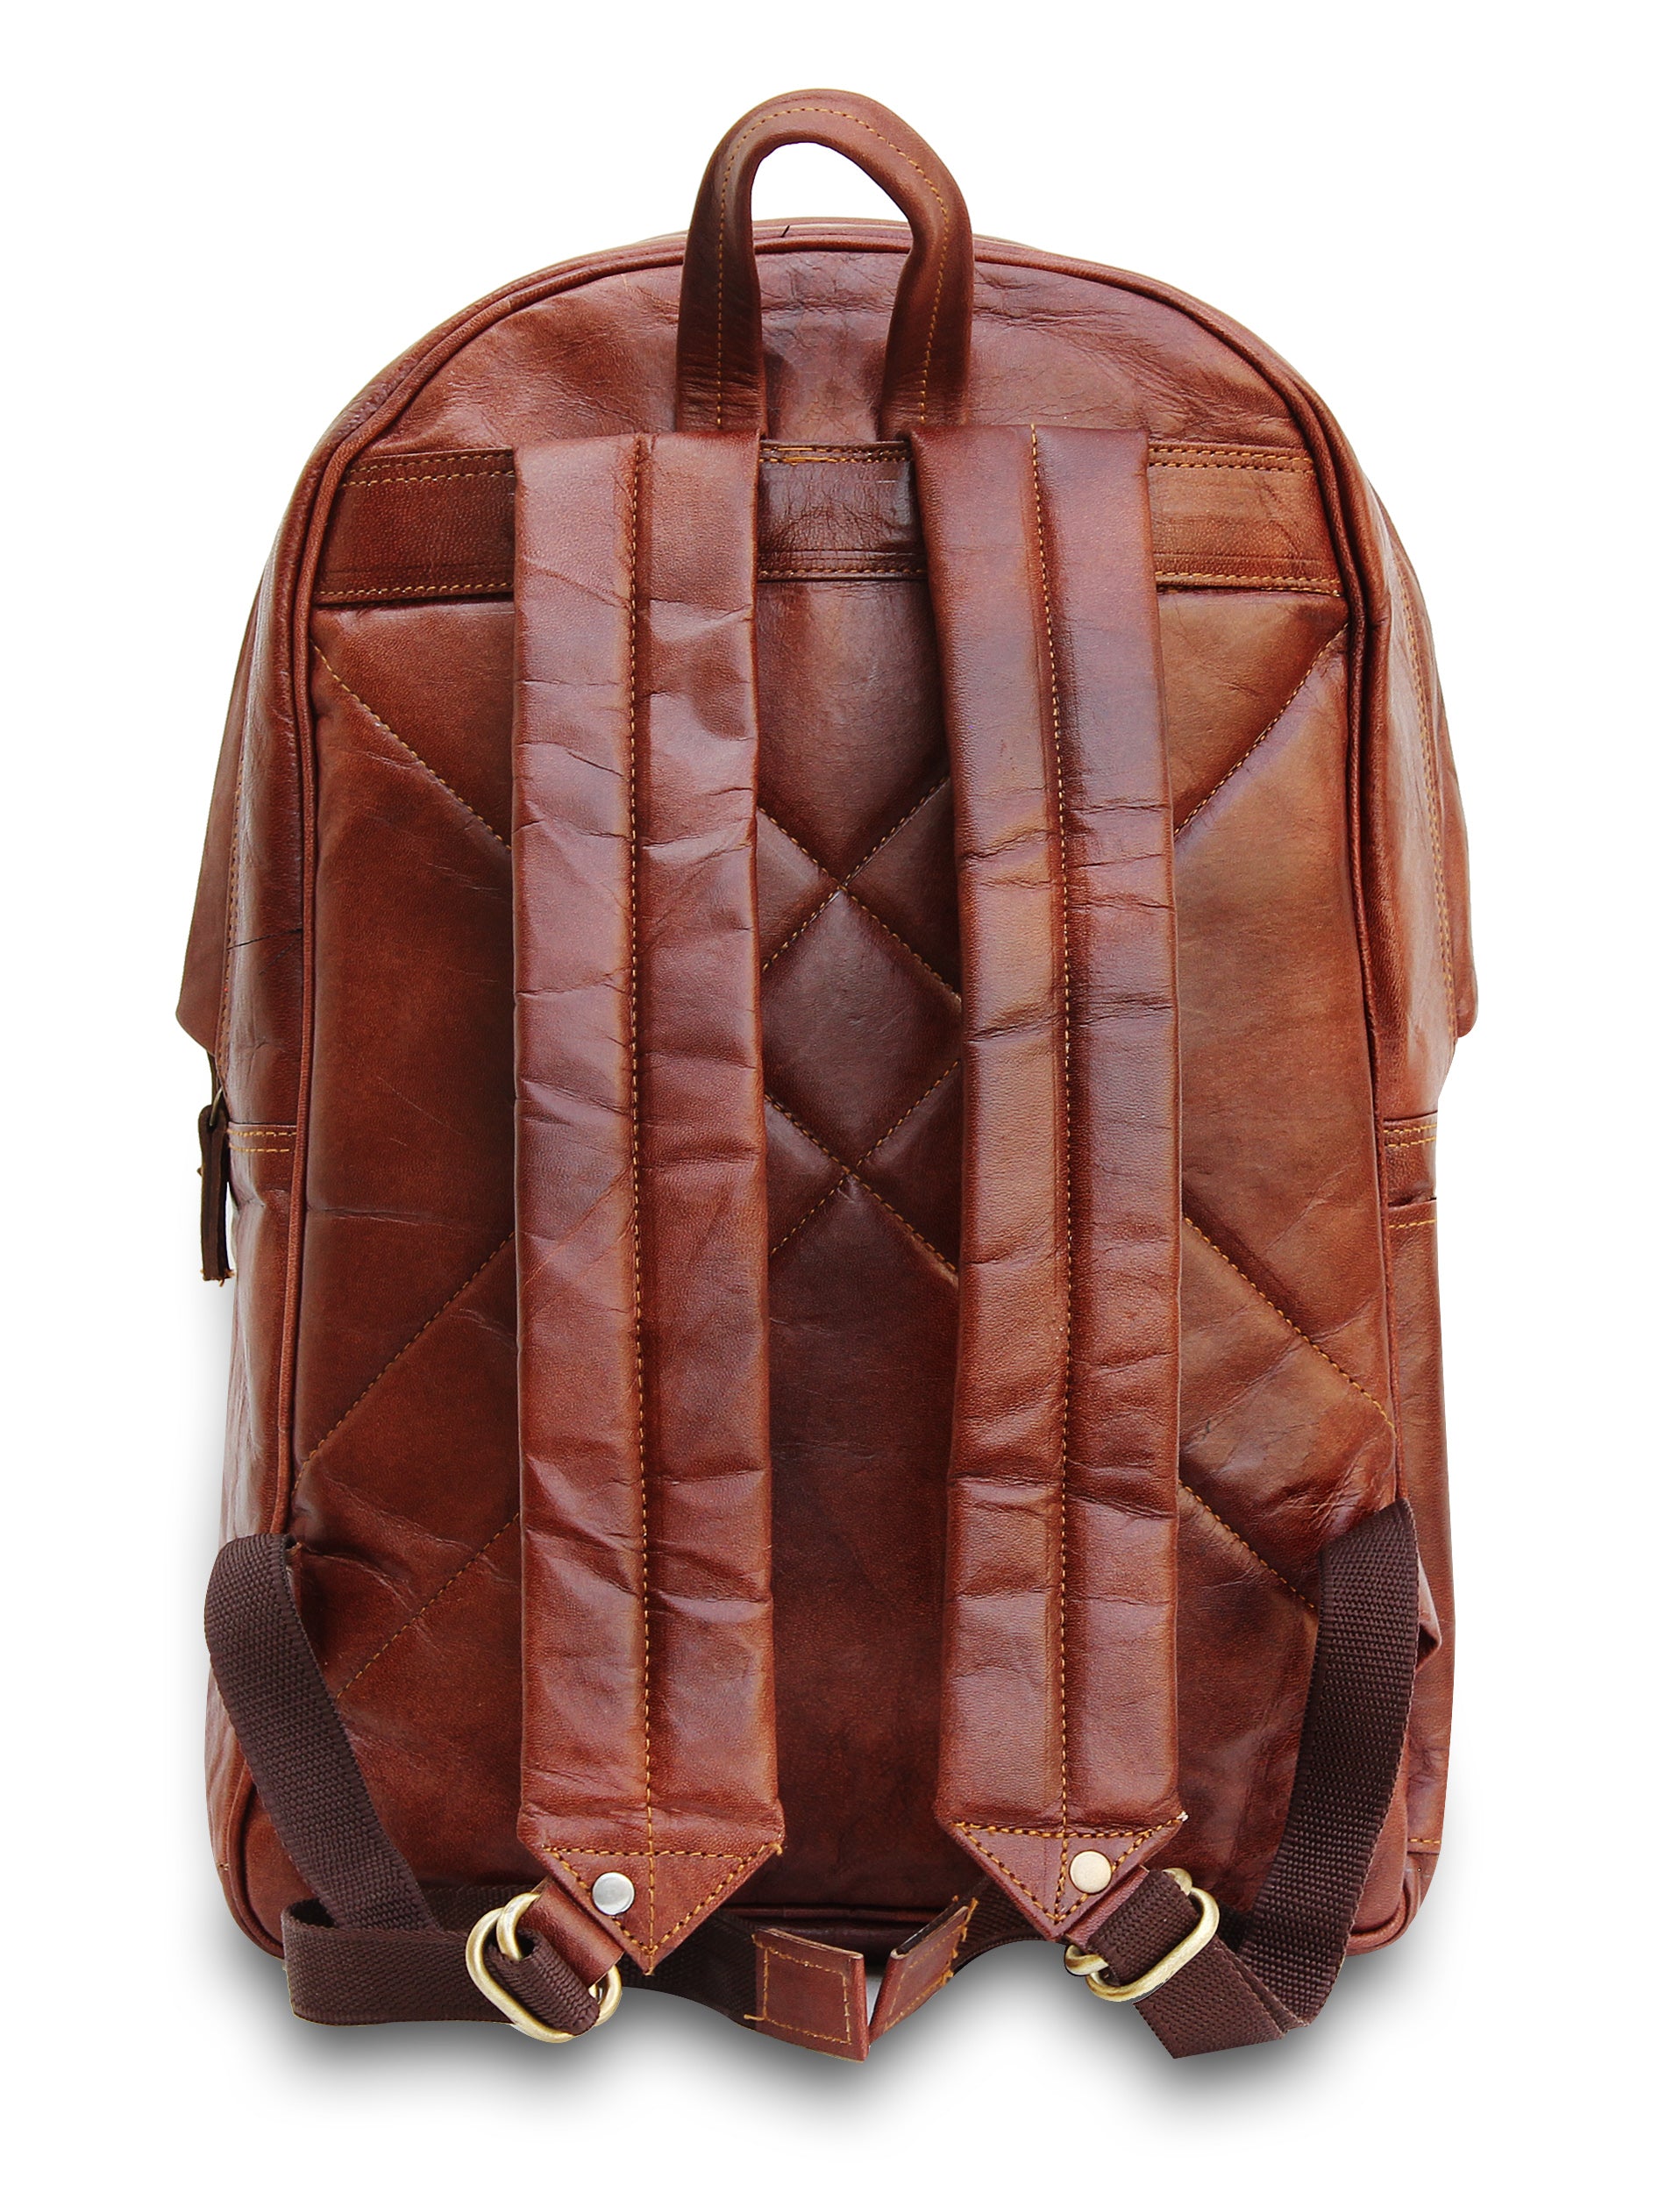 Rustic Leather Backpack with Laptop and Shoulder Padding 